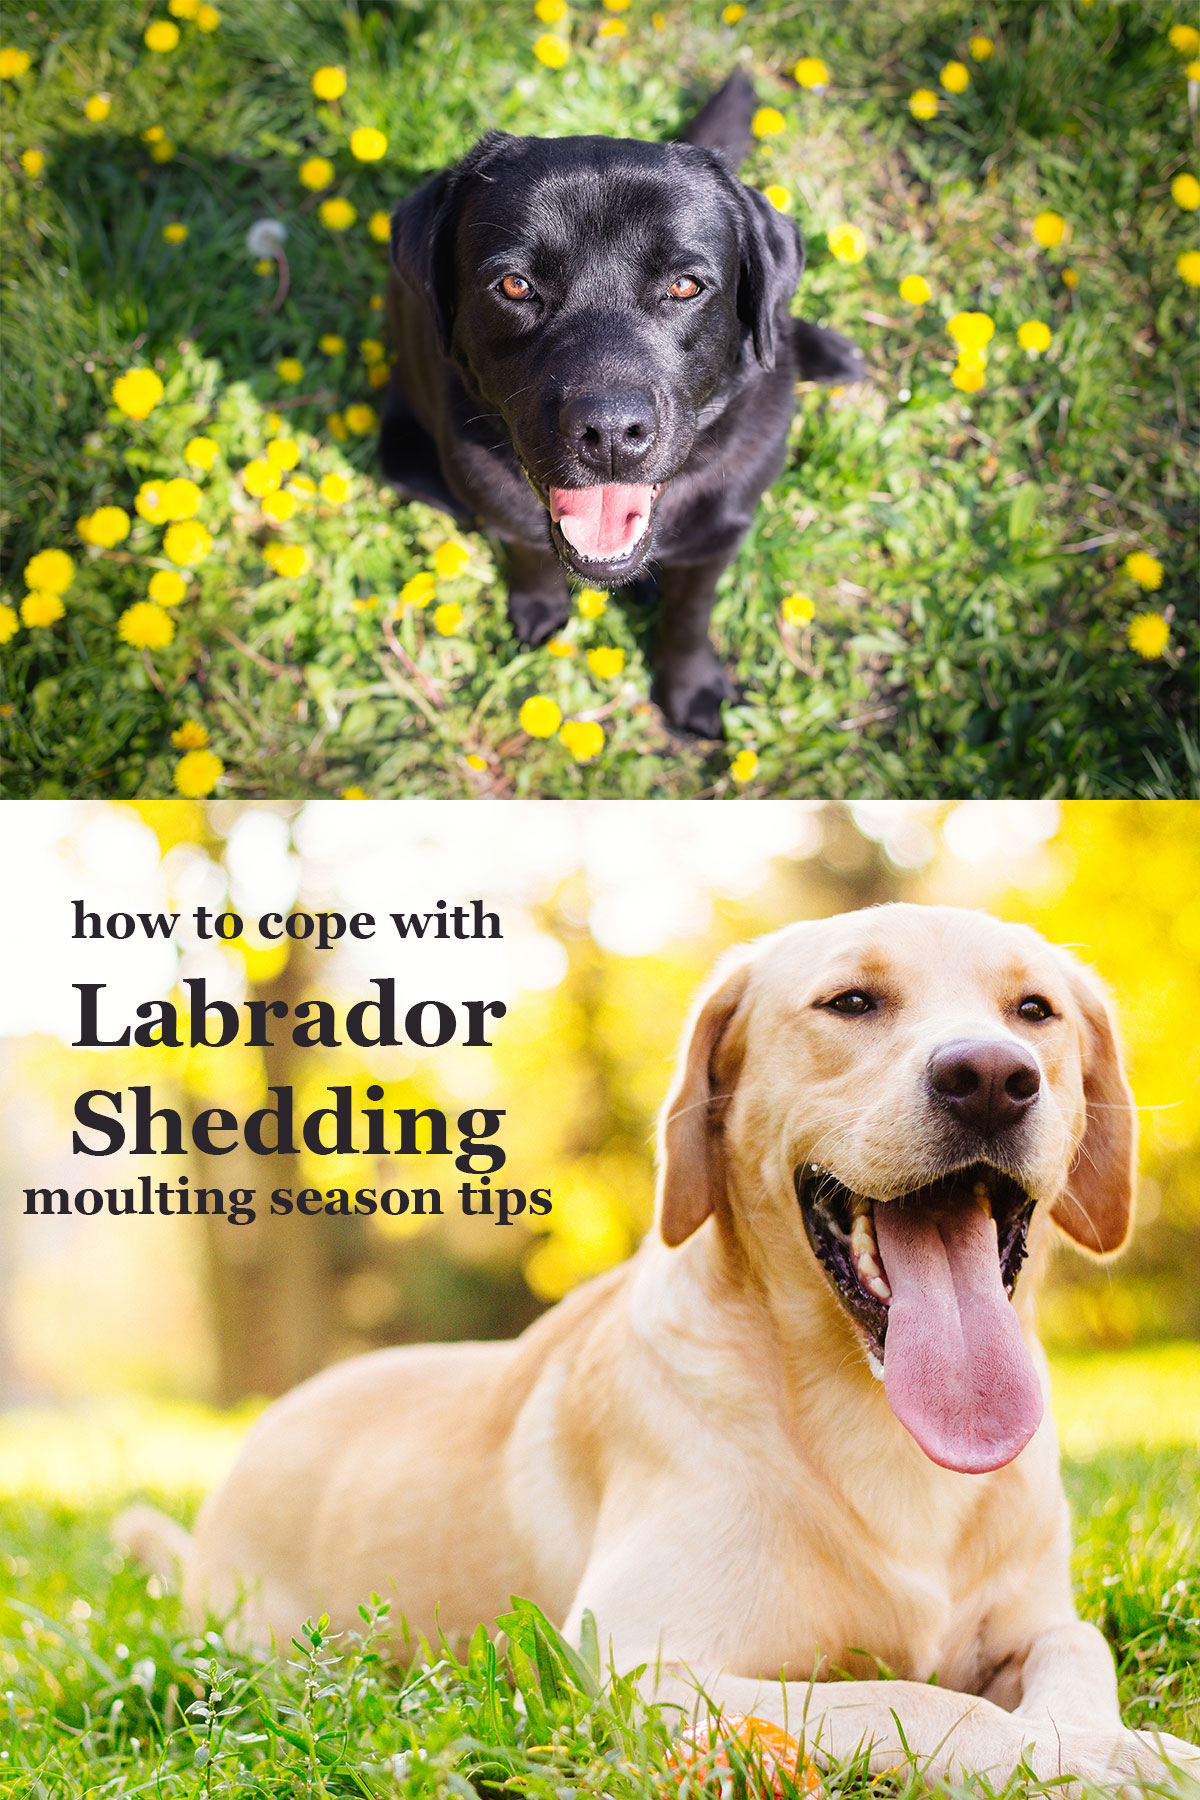 Labradors shed a lot! Here are some top tips and advice for coping with shedding.